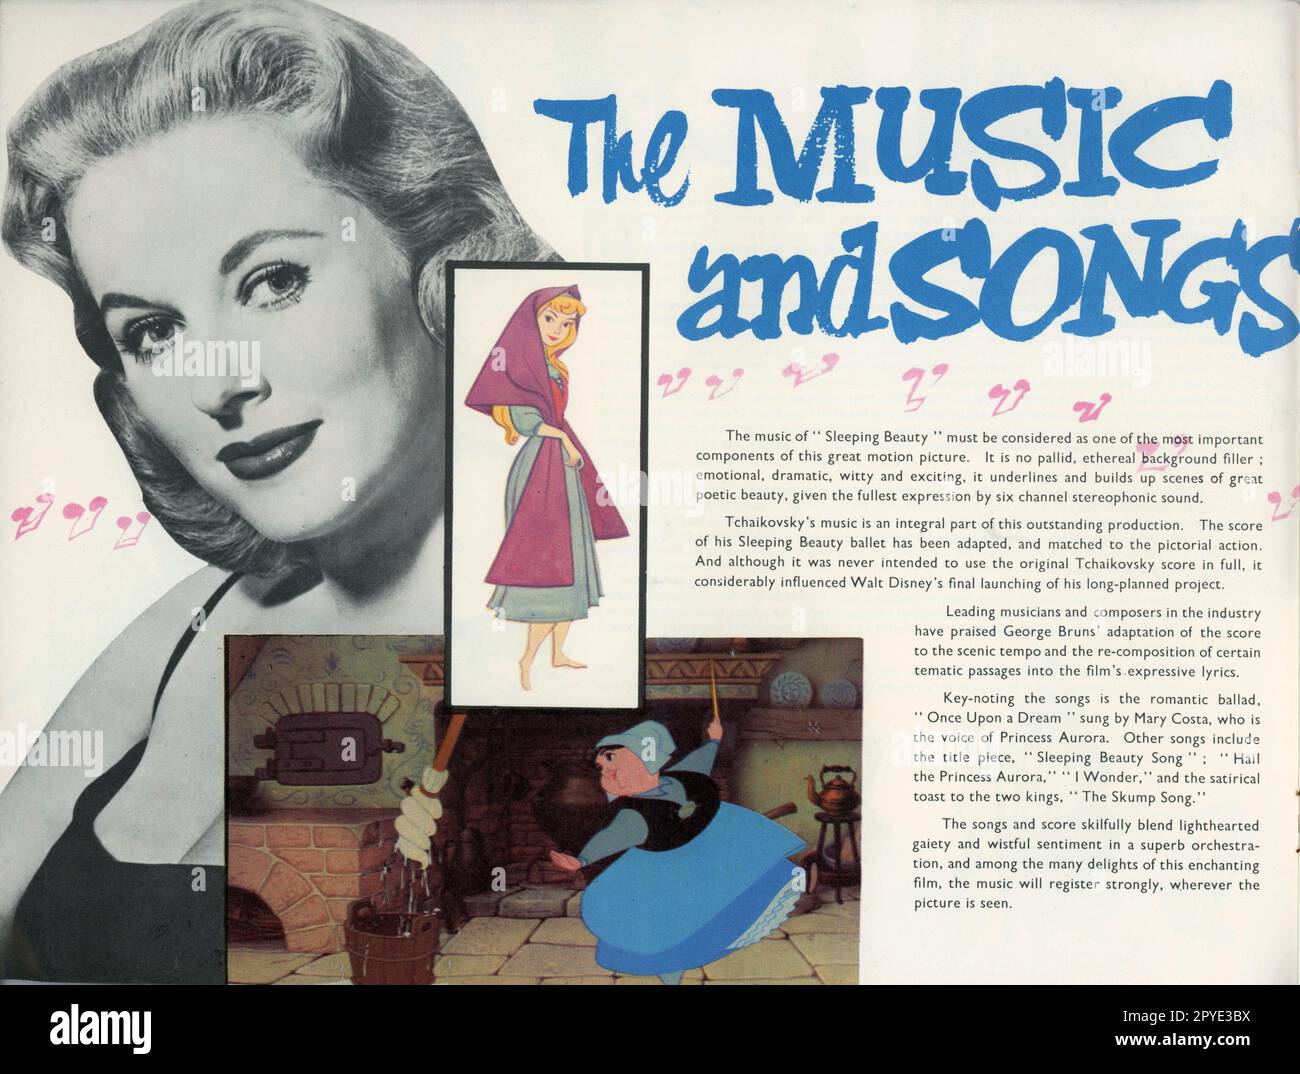 MARY COSTA as voice of Princess Aurora in WALT DISNEY'S SLEEPING BEAUTY 1959 supervising director CLYDE GERONIMI story Charles Perrault songs and score adapted from the ballet music by Tchaikovsky Walt Disney Productions Stock Photo